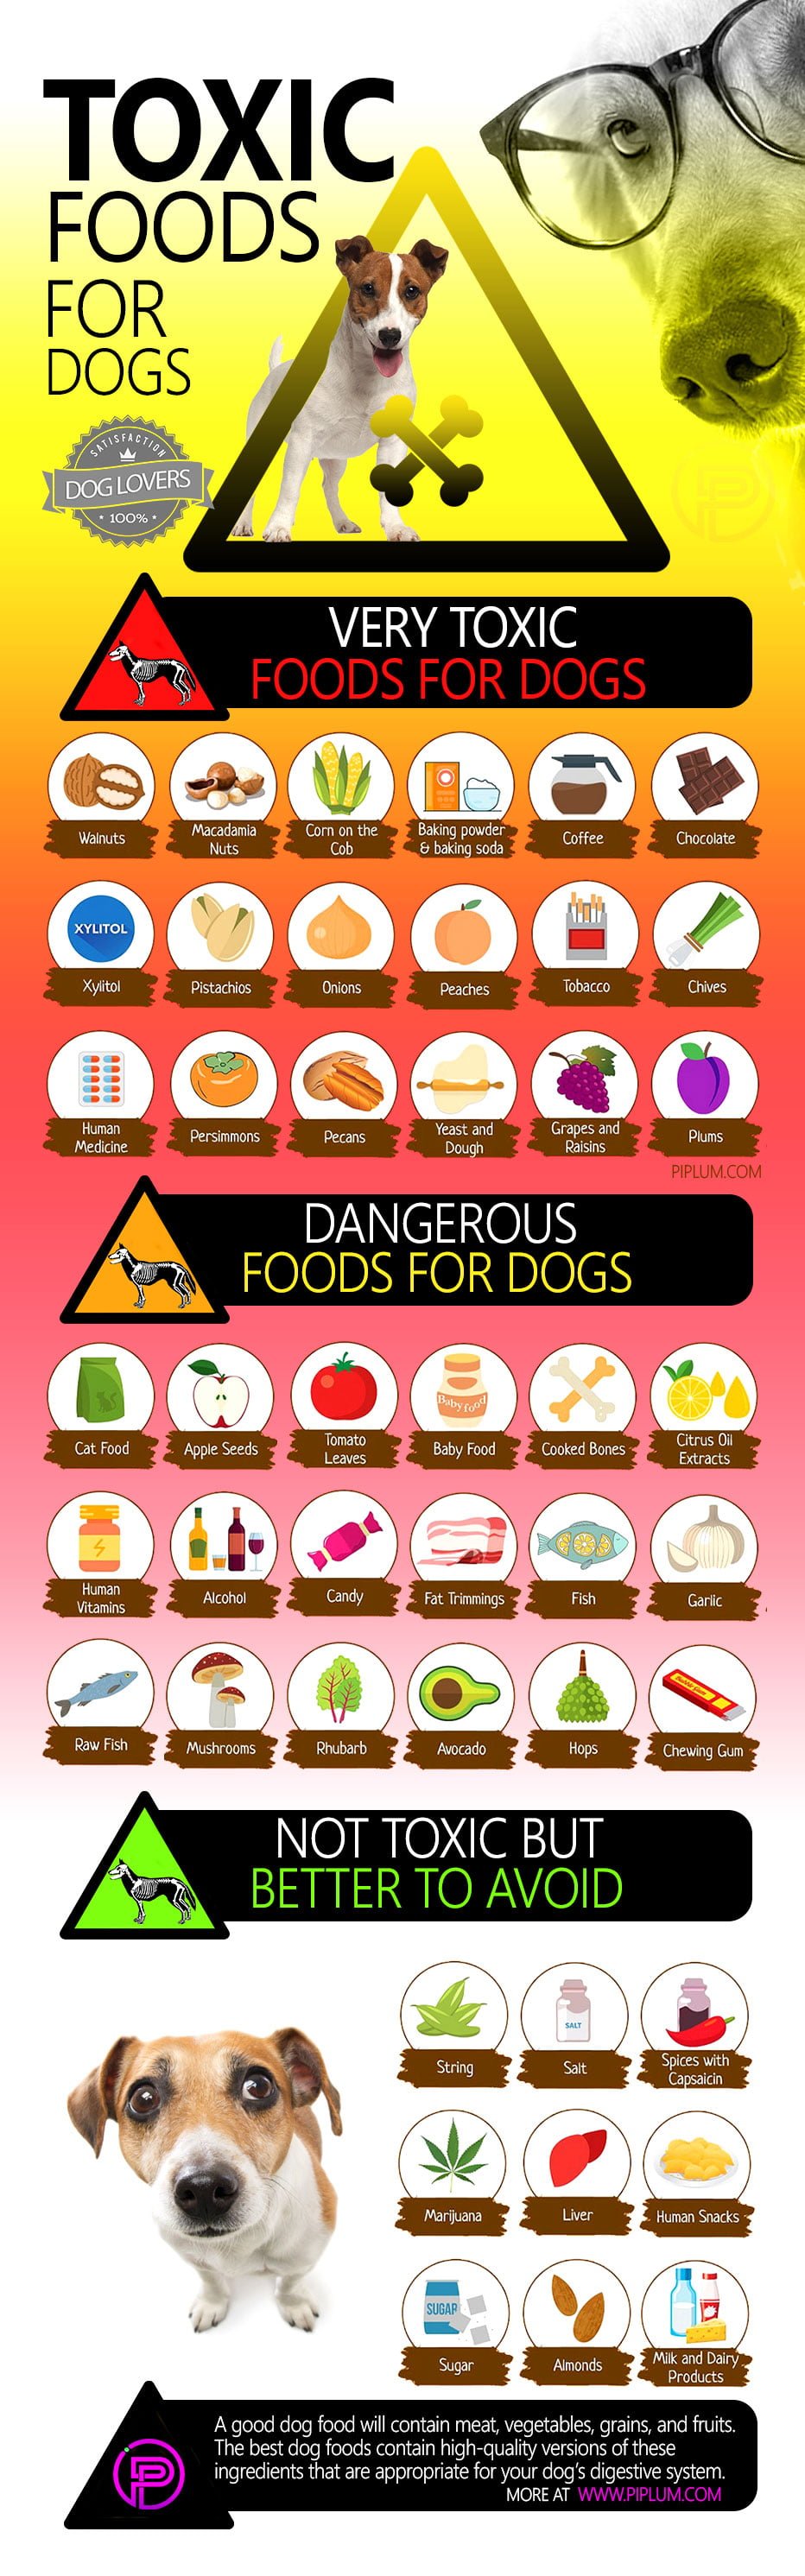 take-care-of-your-puppies-a-list-of-toxic-foods-for-dogs-poster